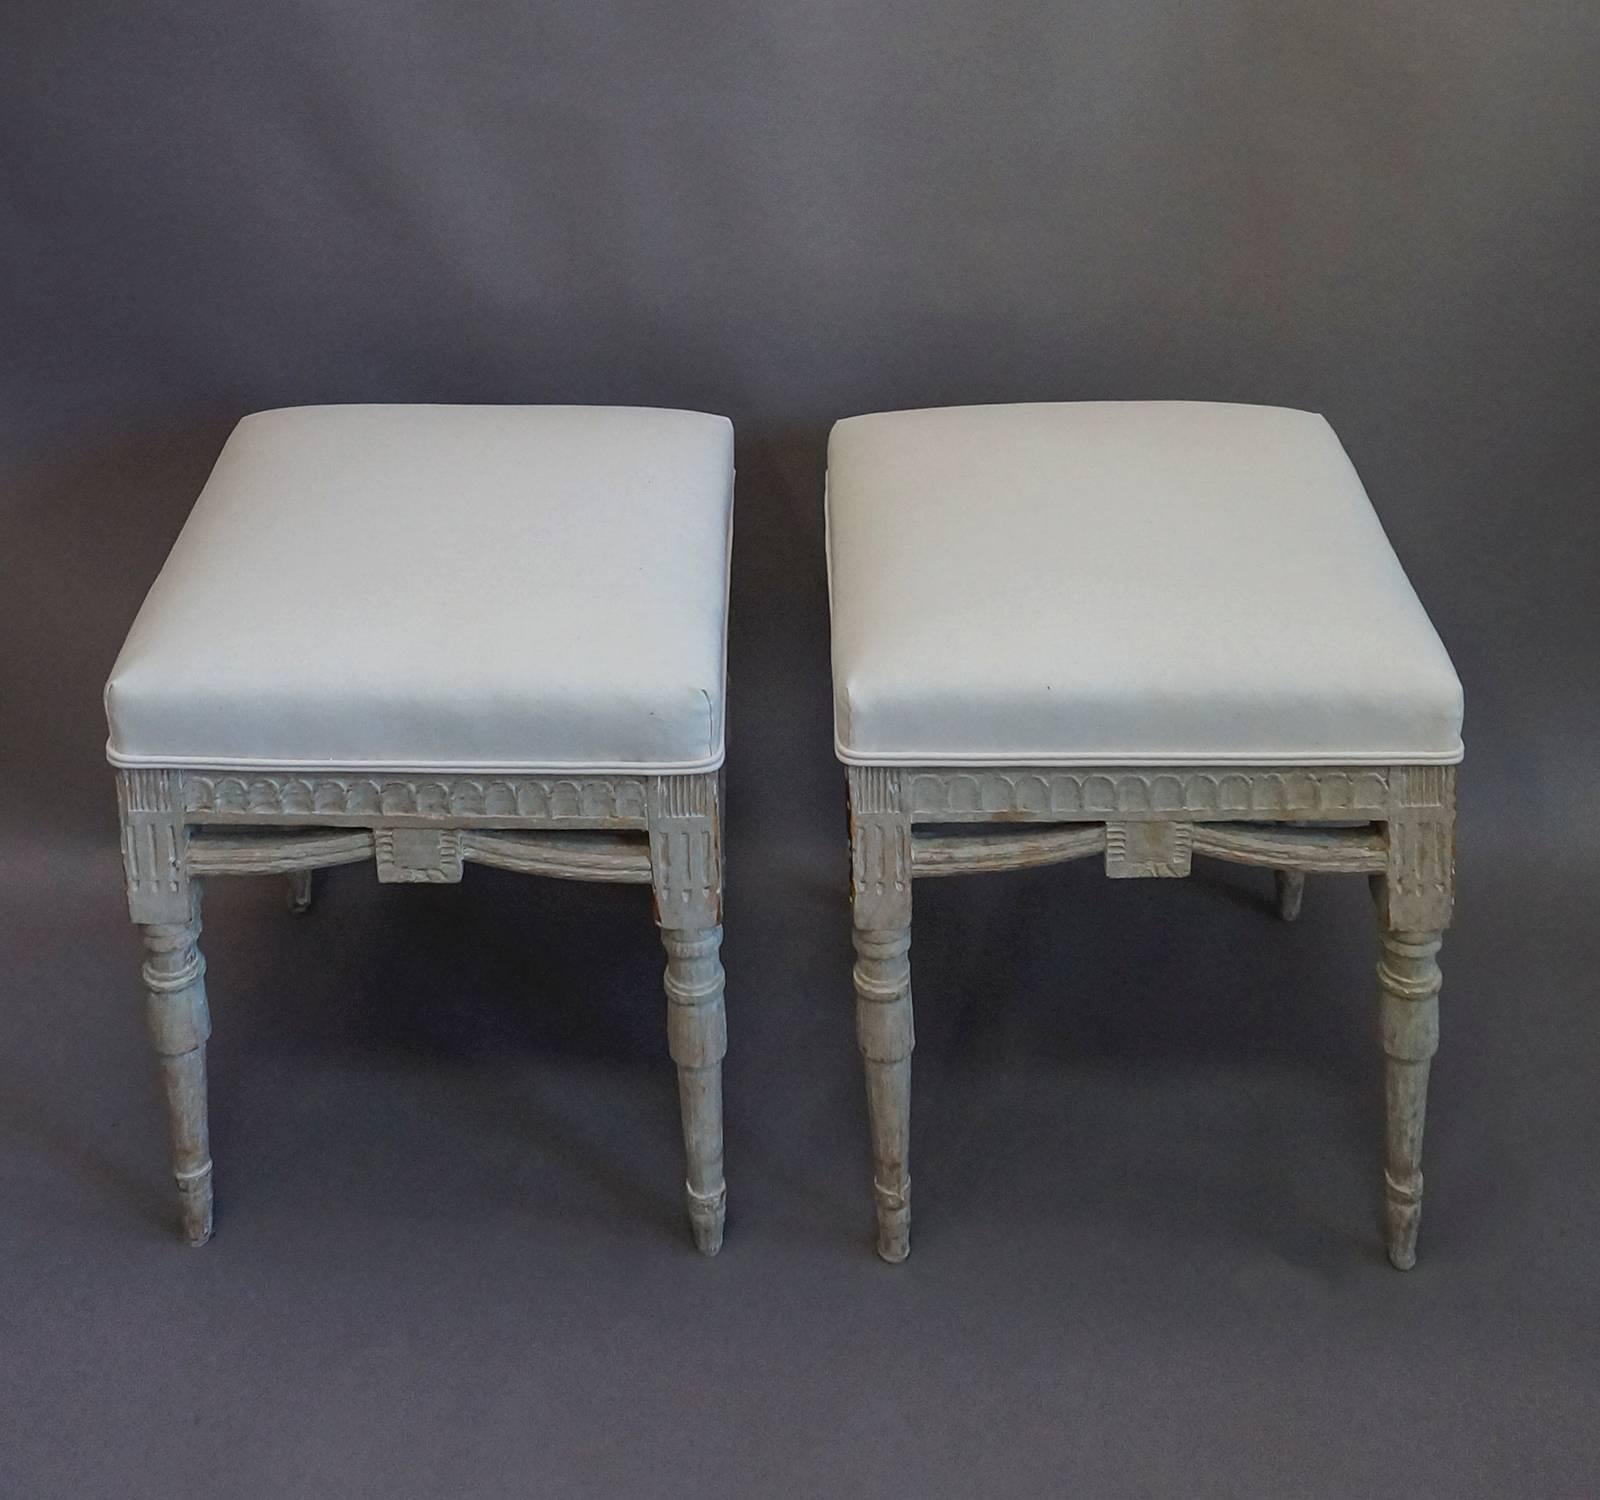 Pair of square stools with carved frames, Sweden, circa 1900. Lambs tongue molding around the upholstered seats and swags between the turned legs.